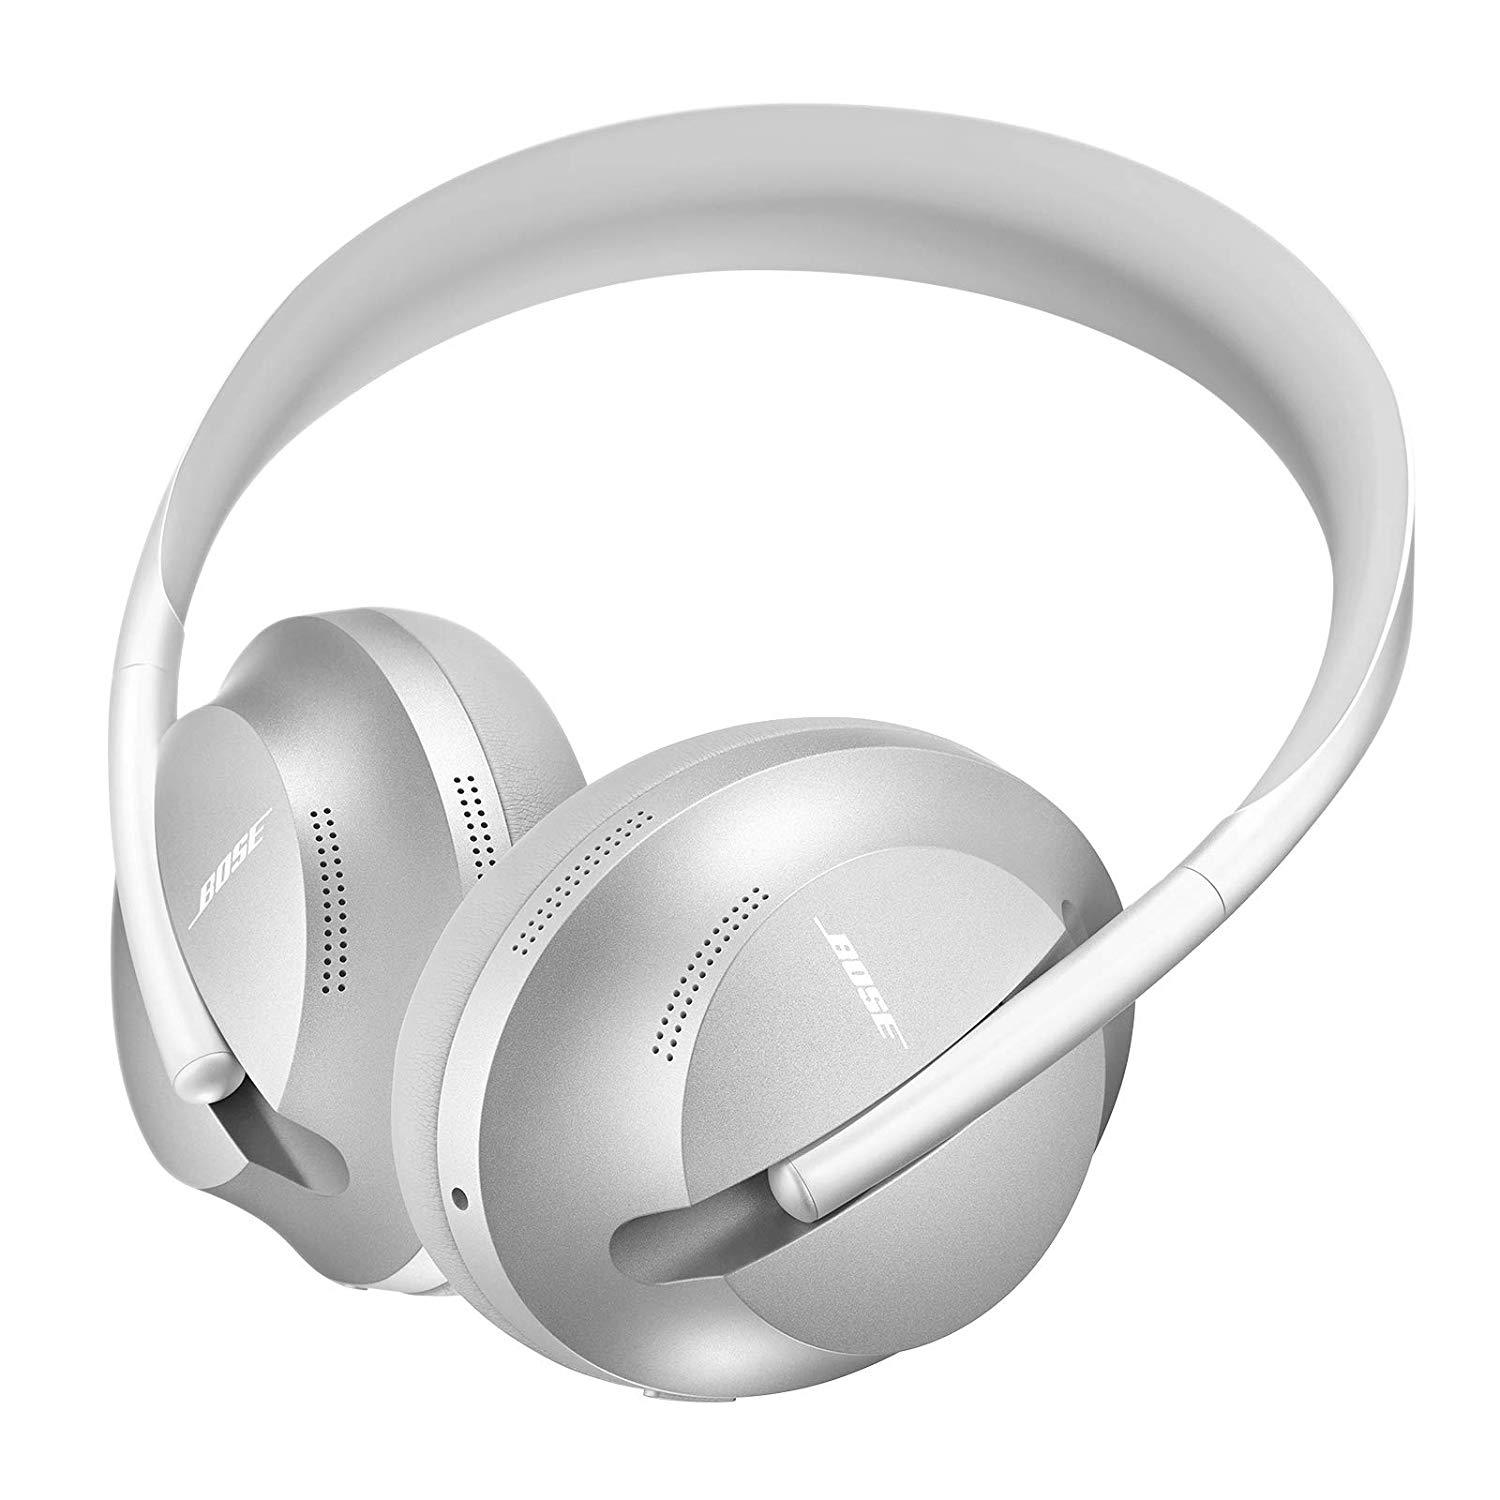 Bose Noise Cancelling Headphones 700 in Canada | Wantboard